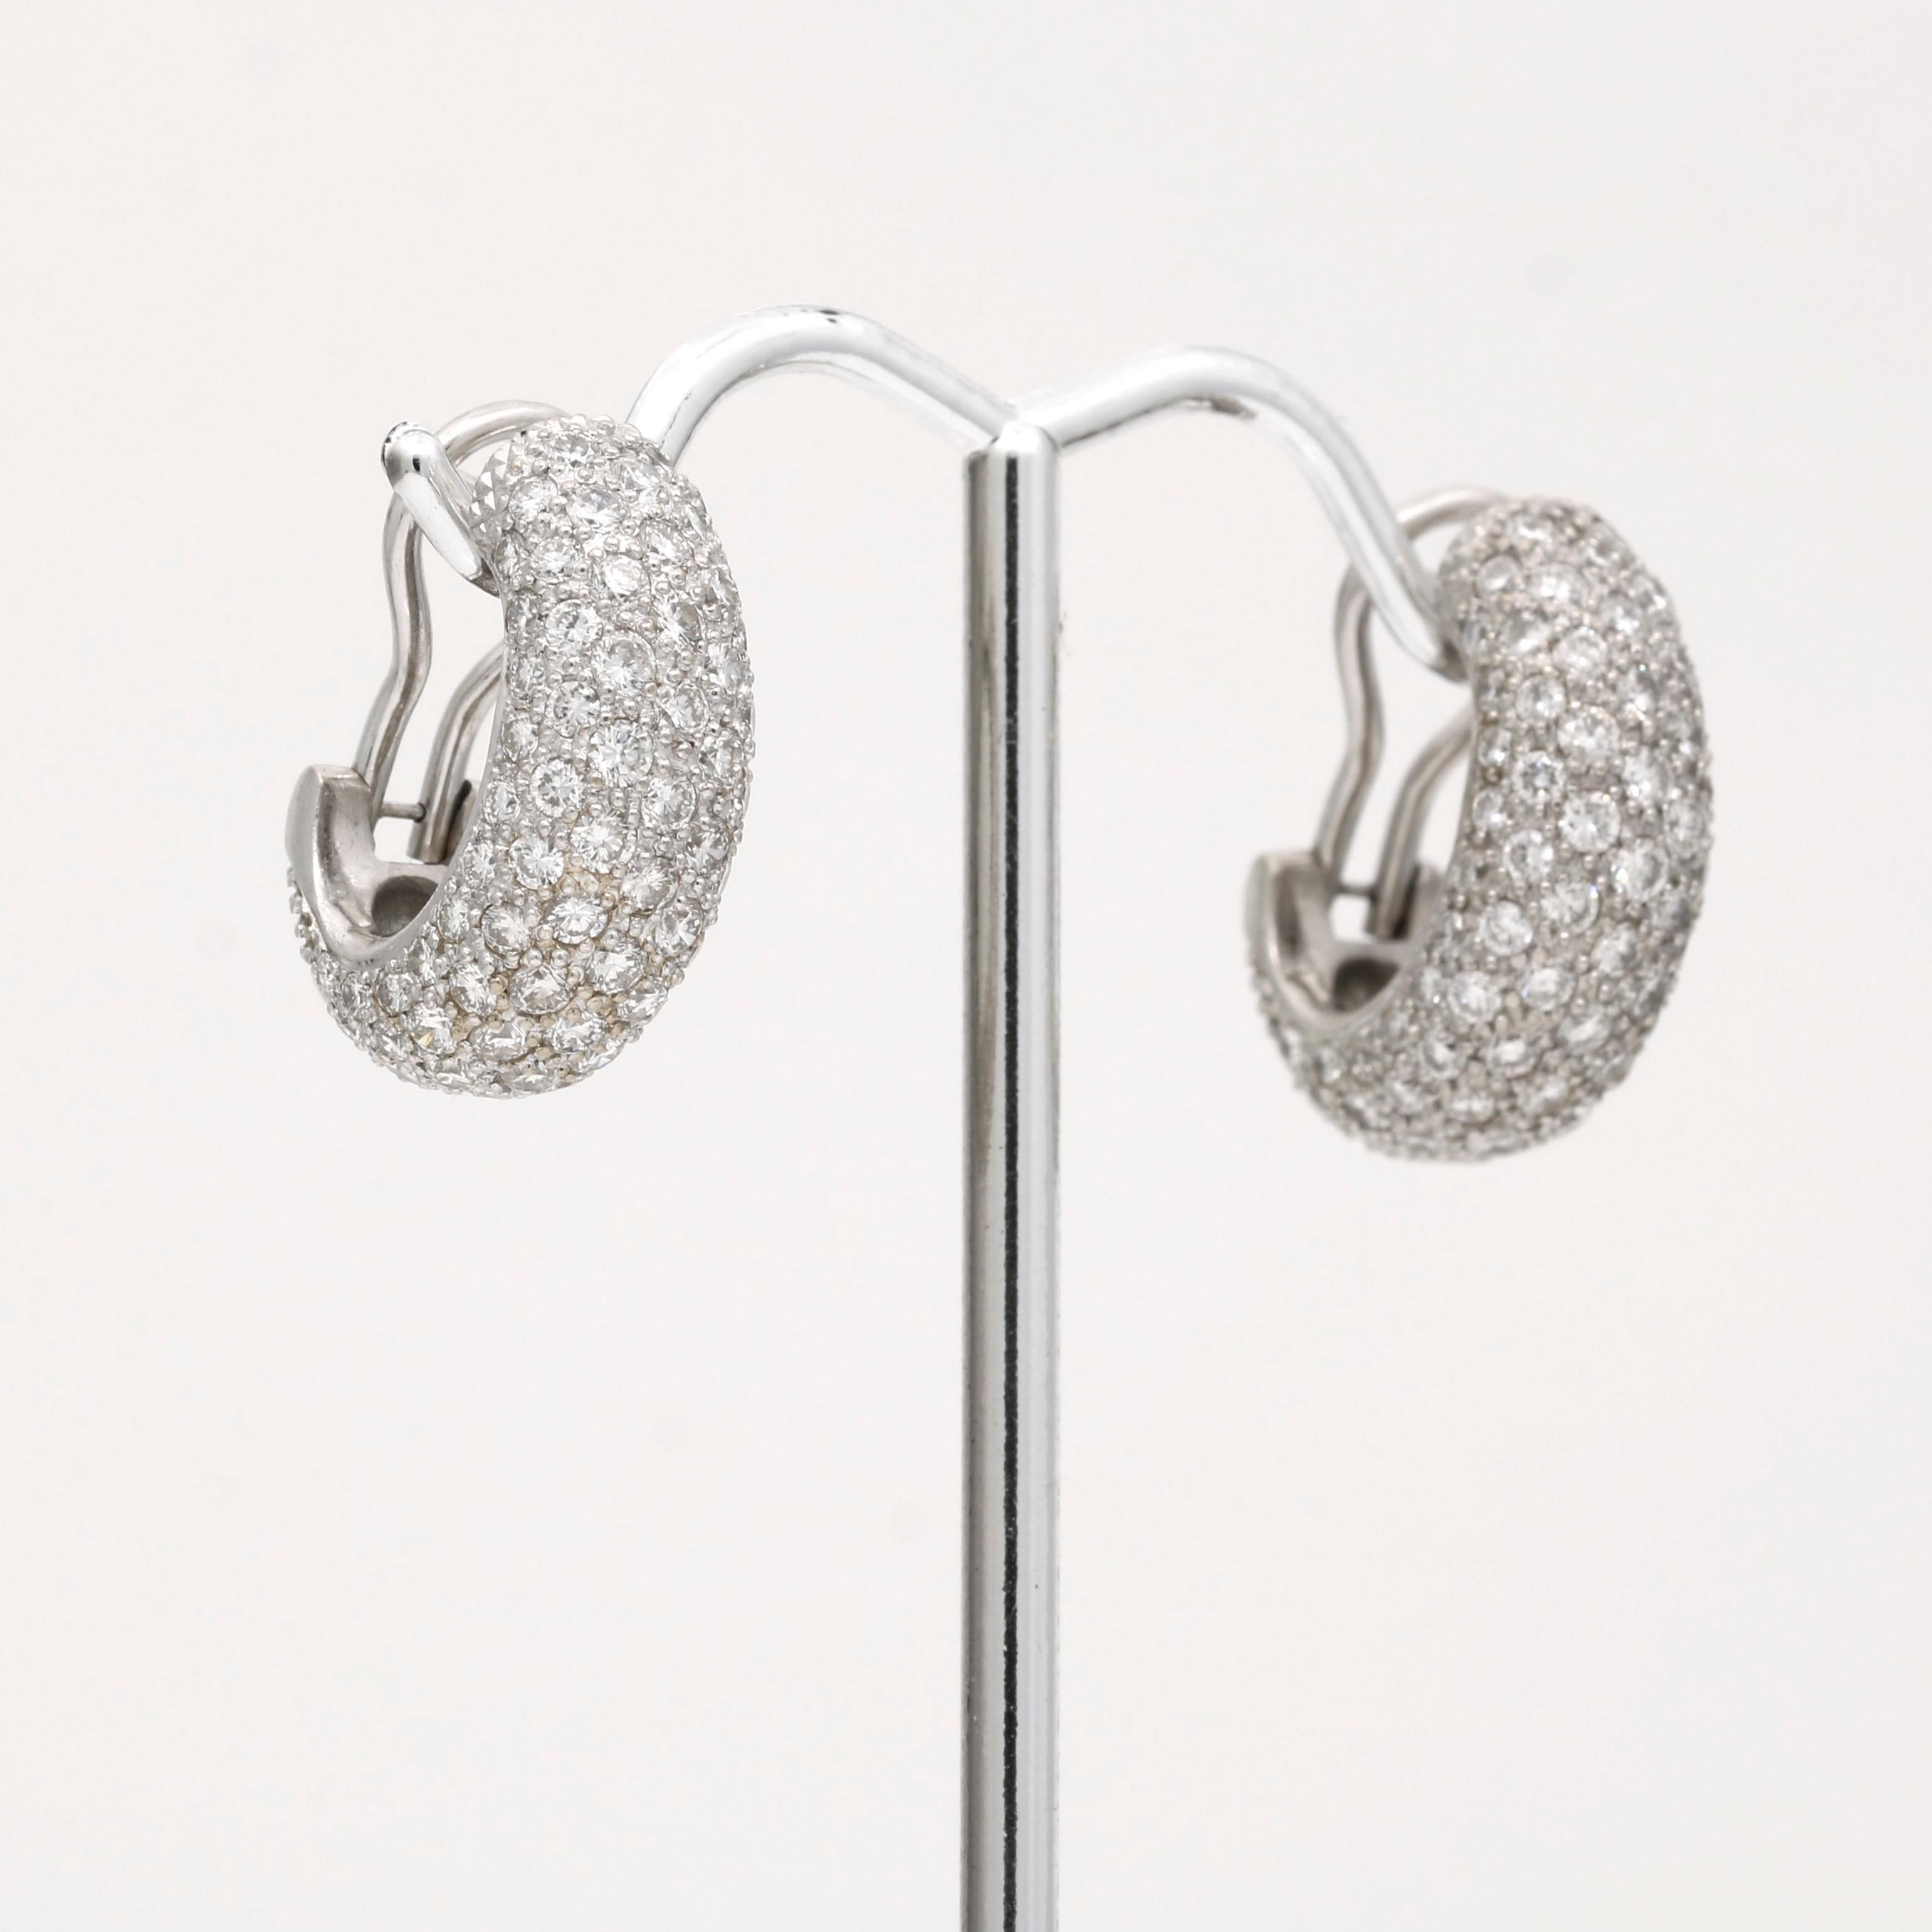 These earrings feature a beautiful and classic design with a C-shaped hoop encrusted in sparkling pave diamonds. The diamonds are of high quality, weighing a total of 3.80 carats, have a near-colorless appearance, and are very clean, with only minor